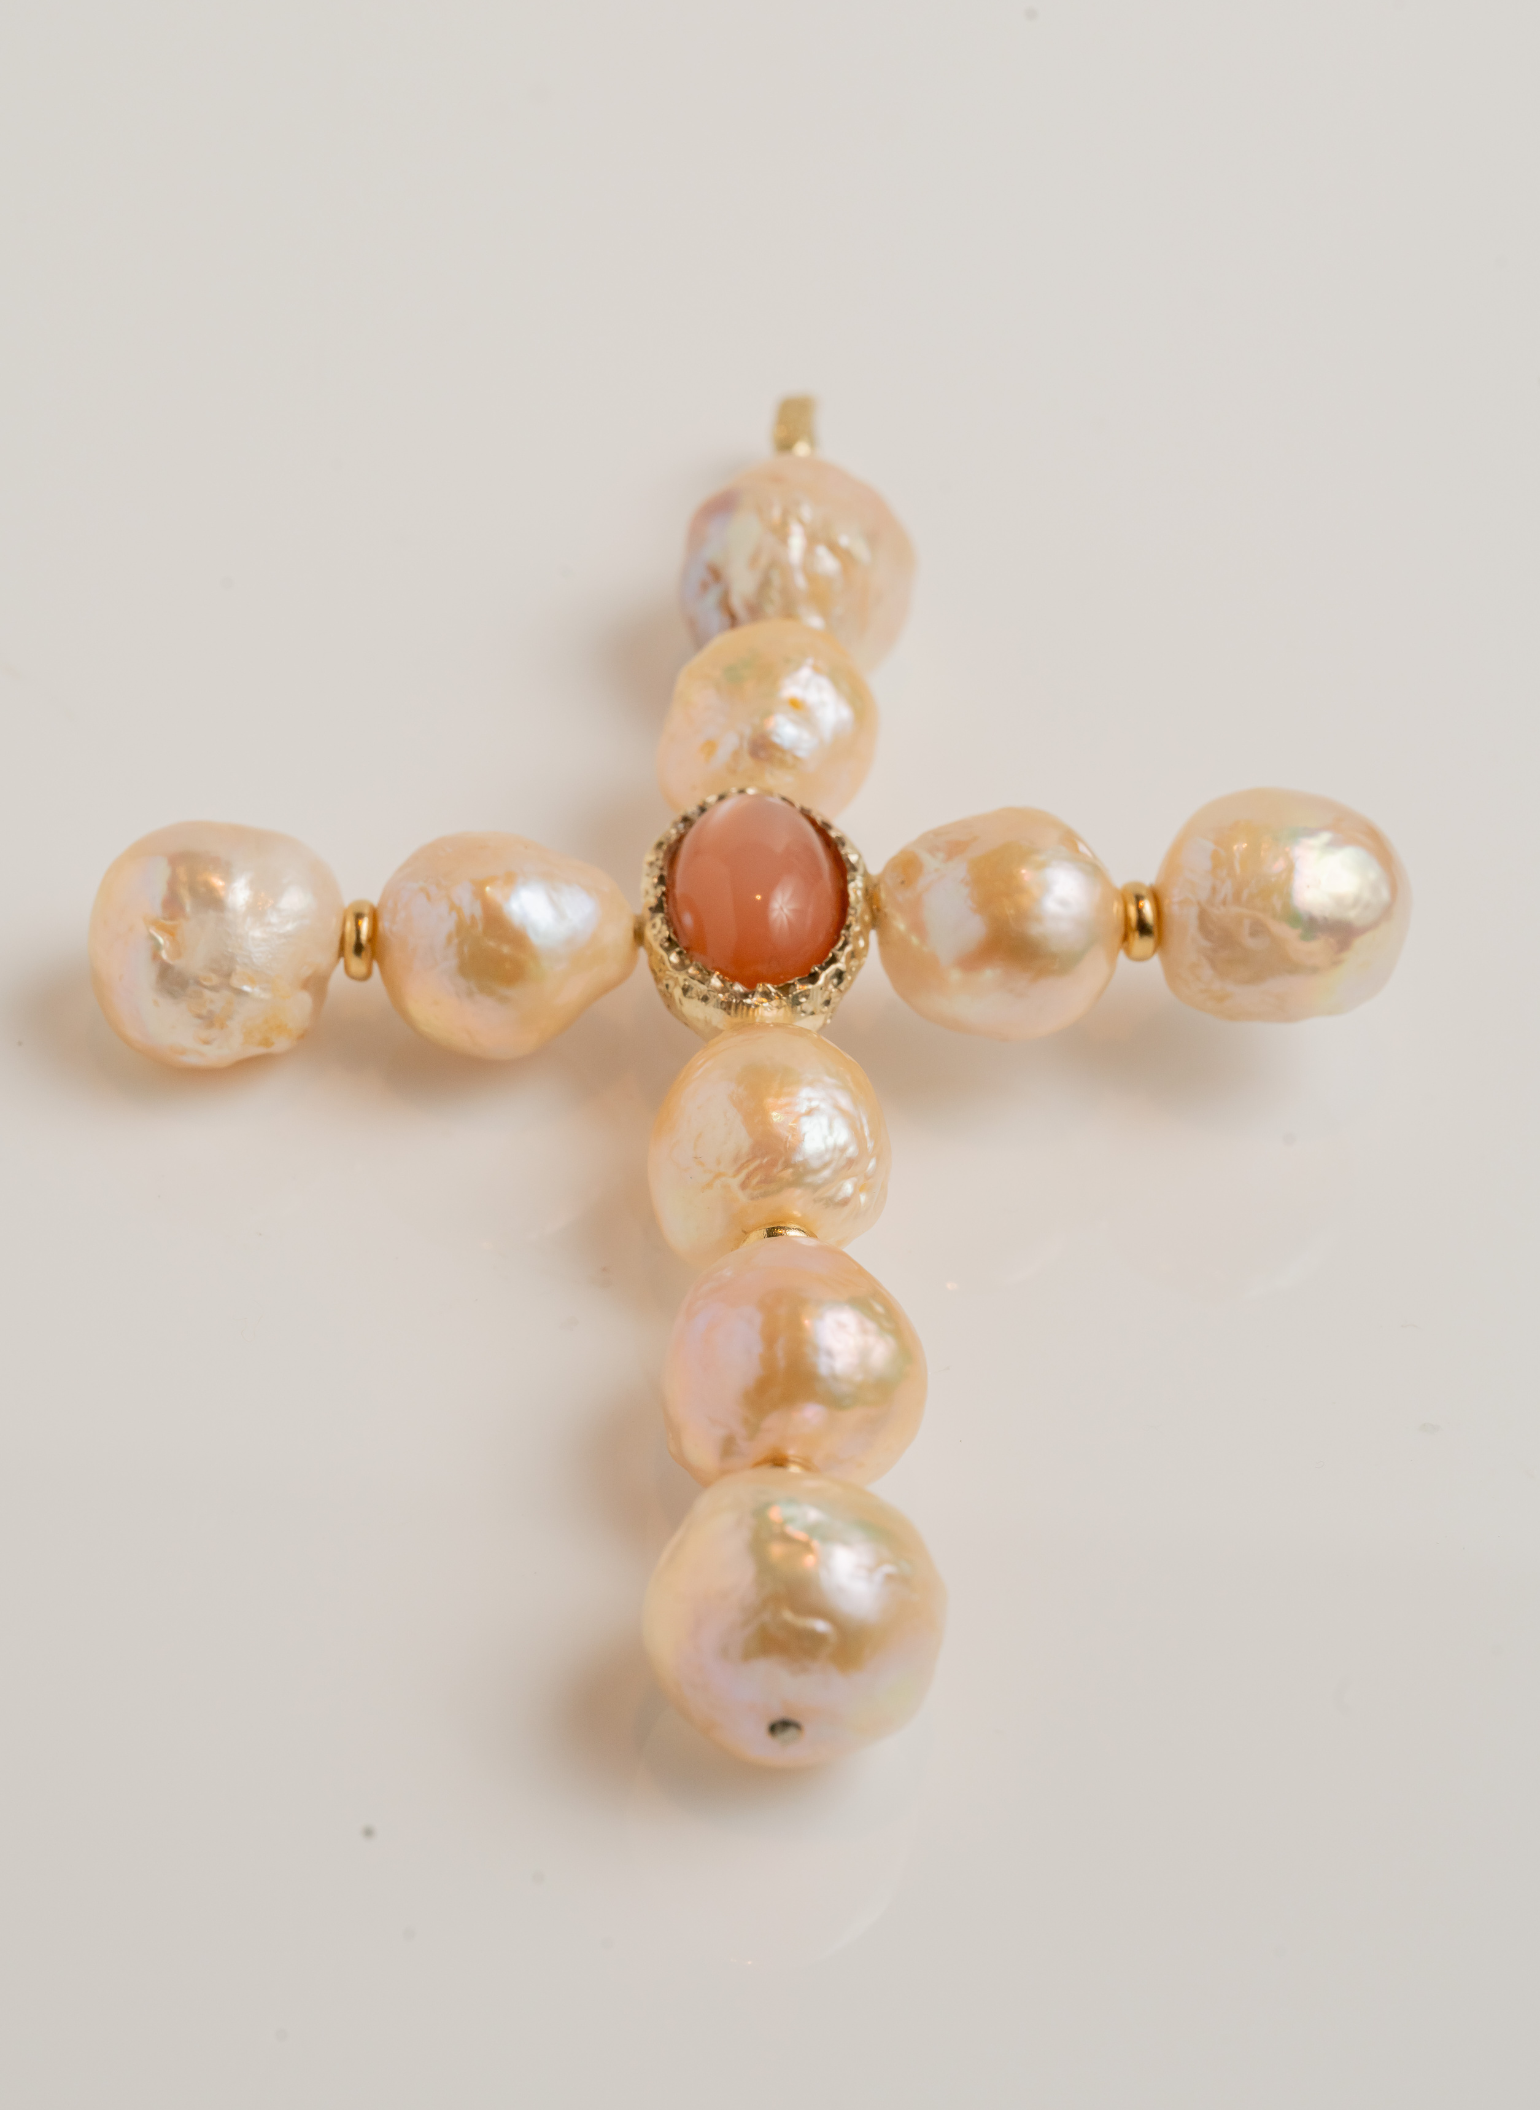 Dolce Far Niente Latin Cross Pearls and Agate Pendant